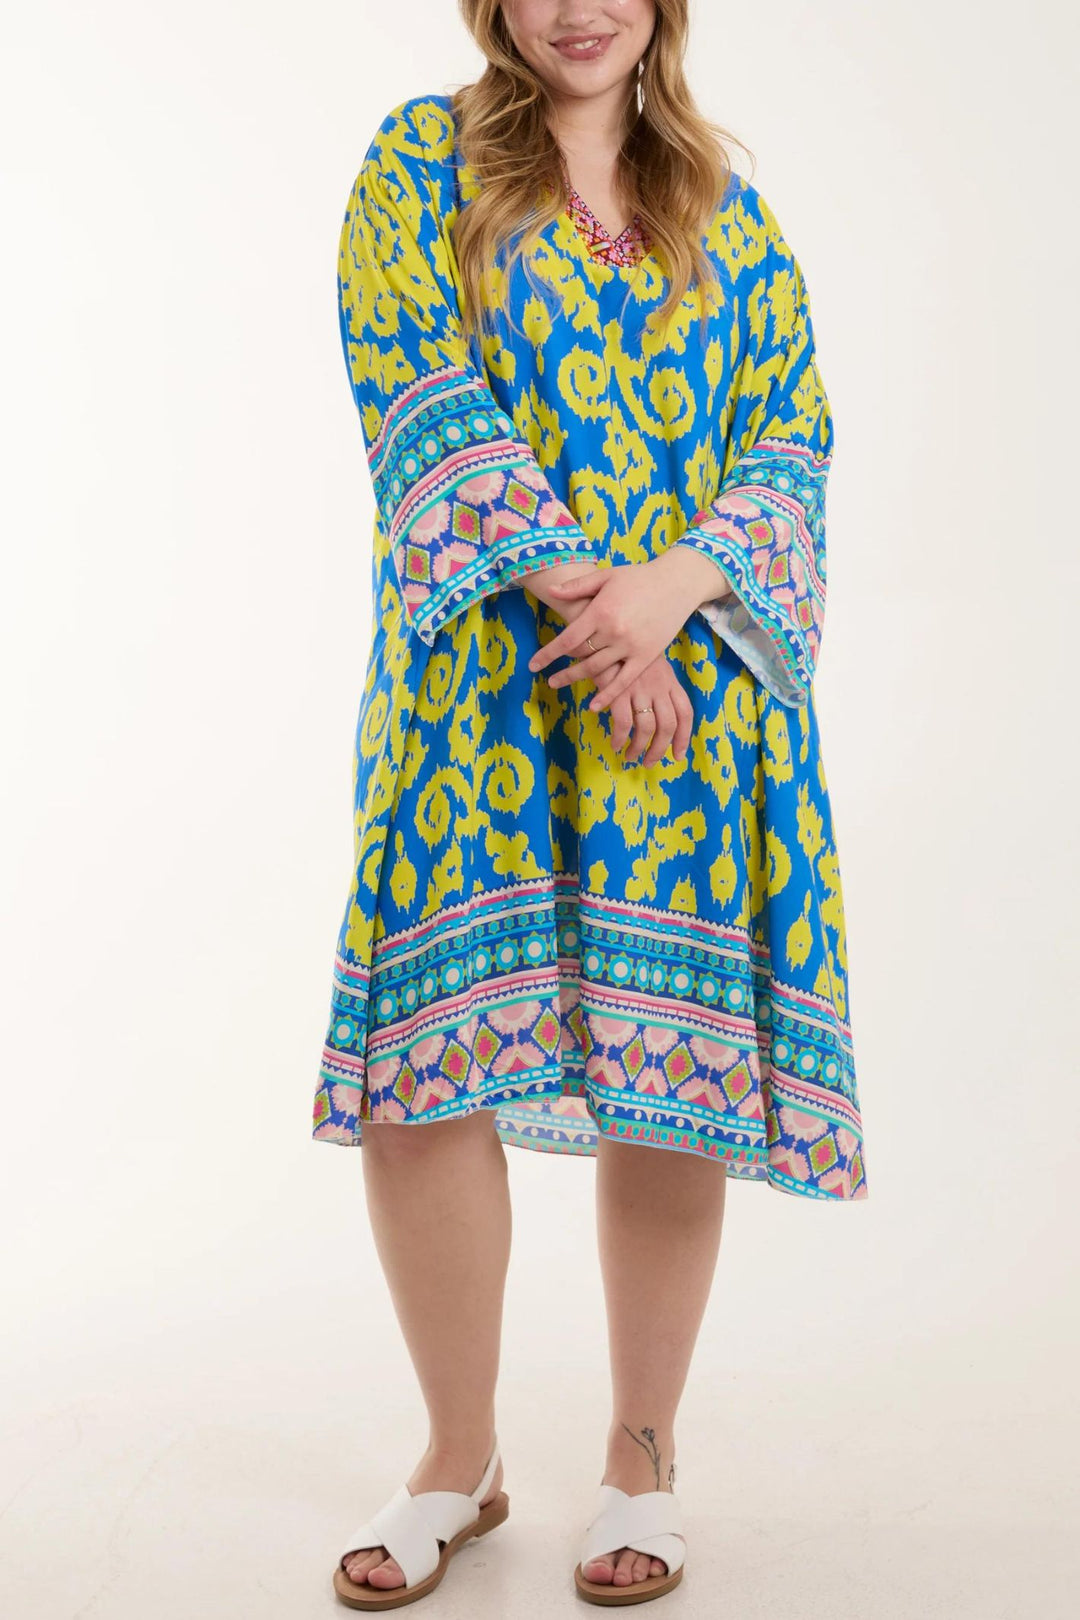 Cobalt & Sunshine Yellow A-line Tunic Cover Up